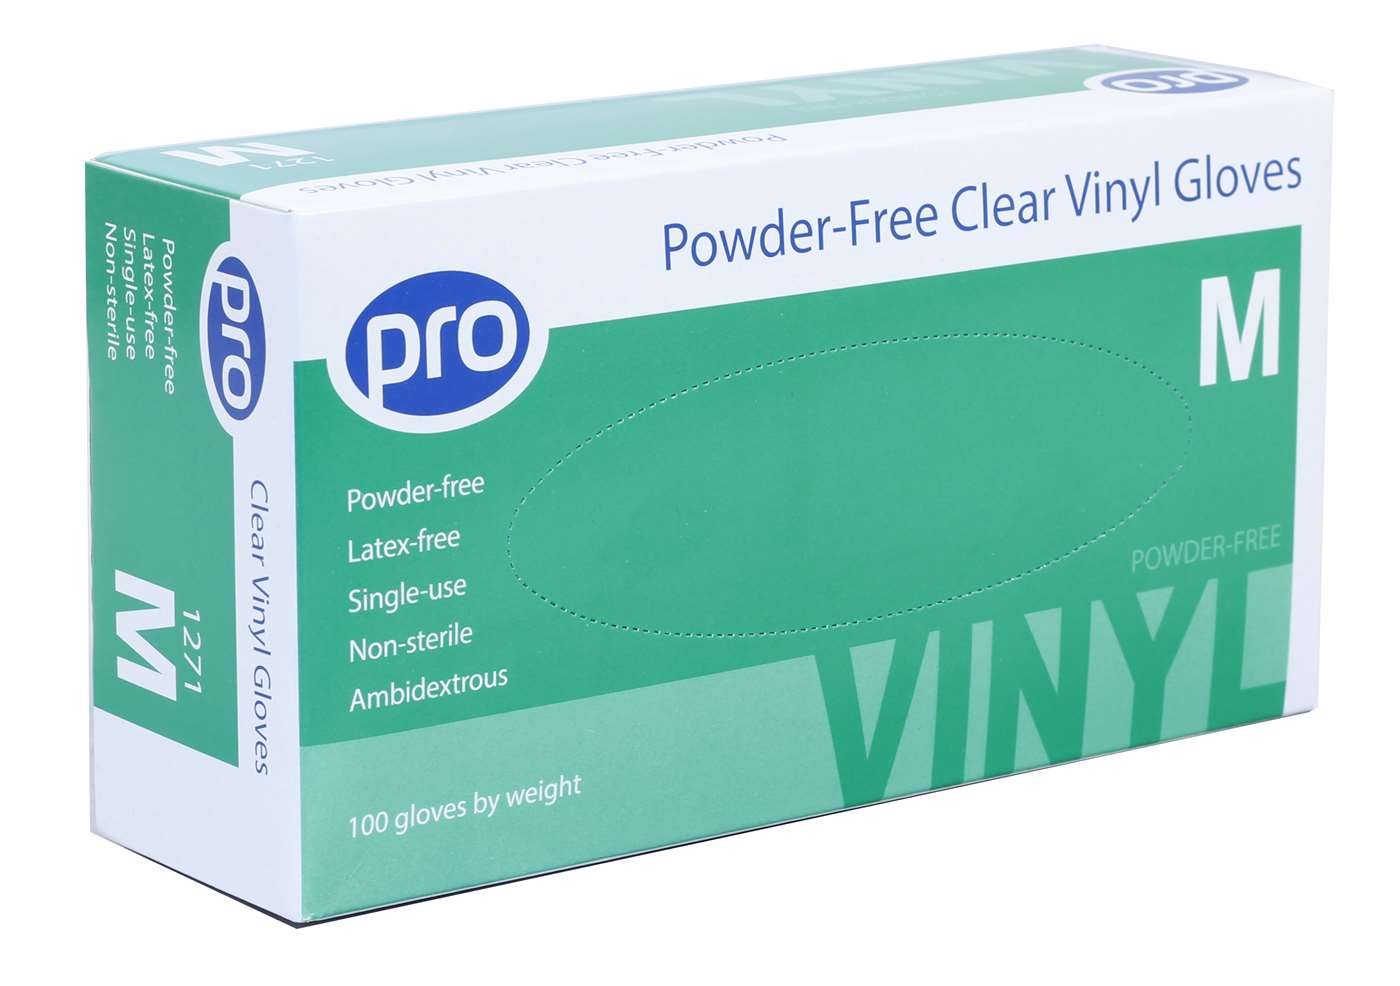 Vinyl Clear Powder-Free Disposable Gloves (100) - Ultimate Hair and Beauty